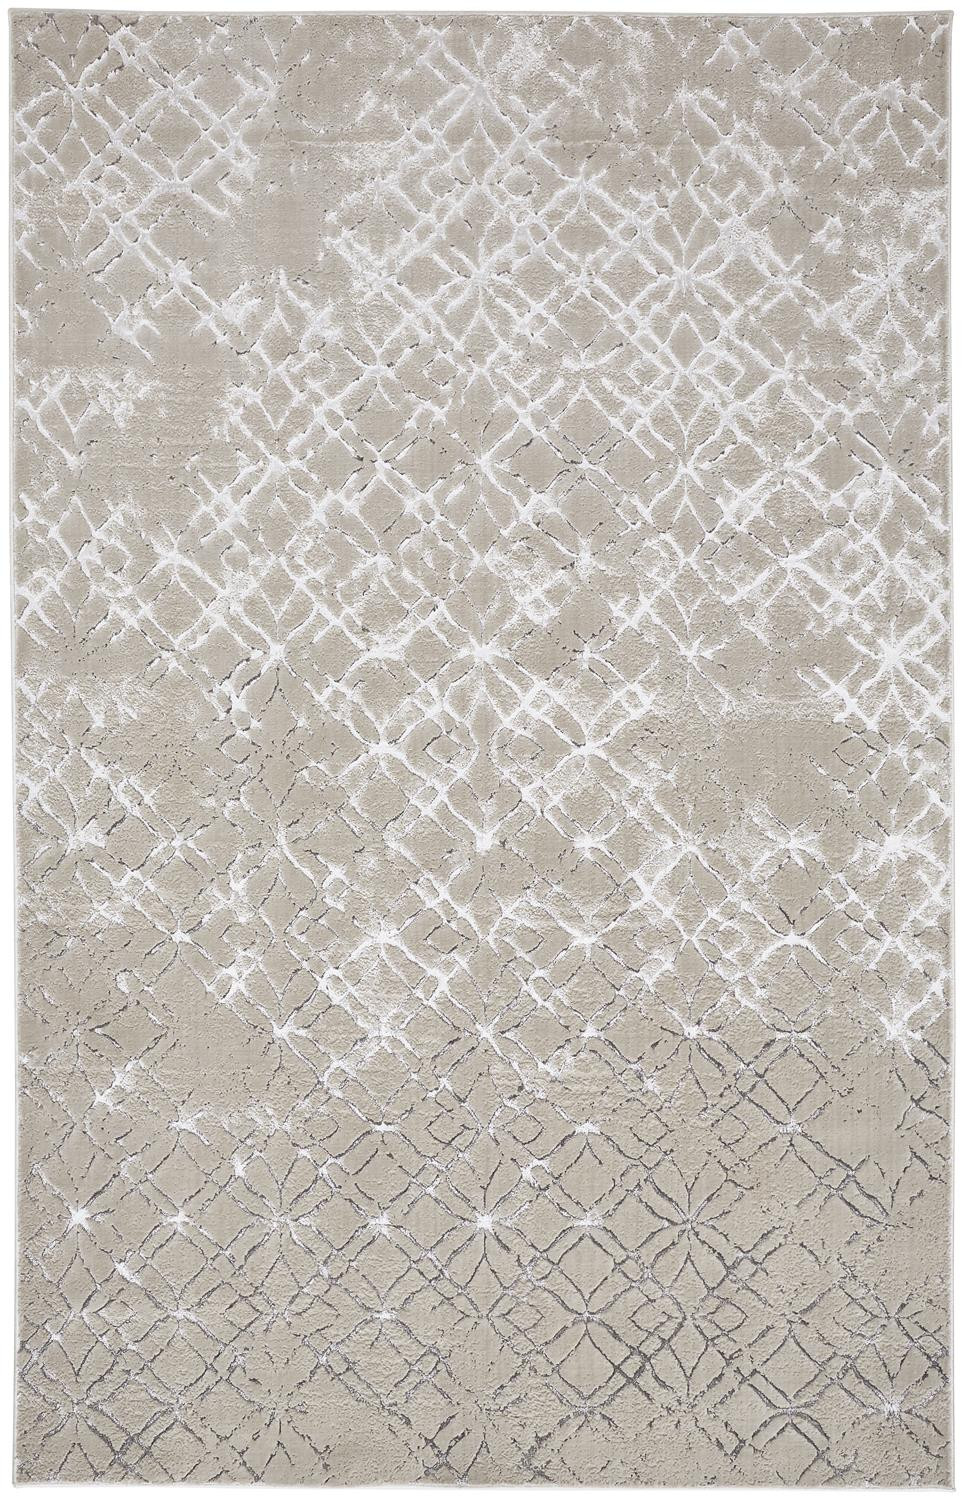 5' X 8' Silver Gray And White Abstract Stain Resistant Area Rug-511495-1